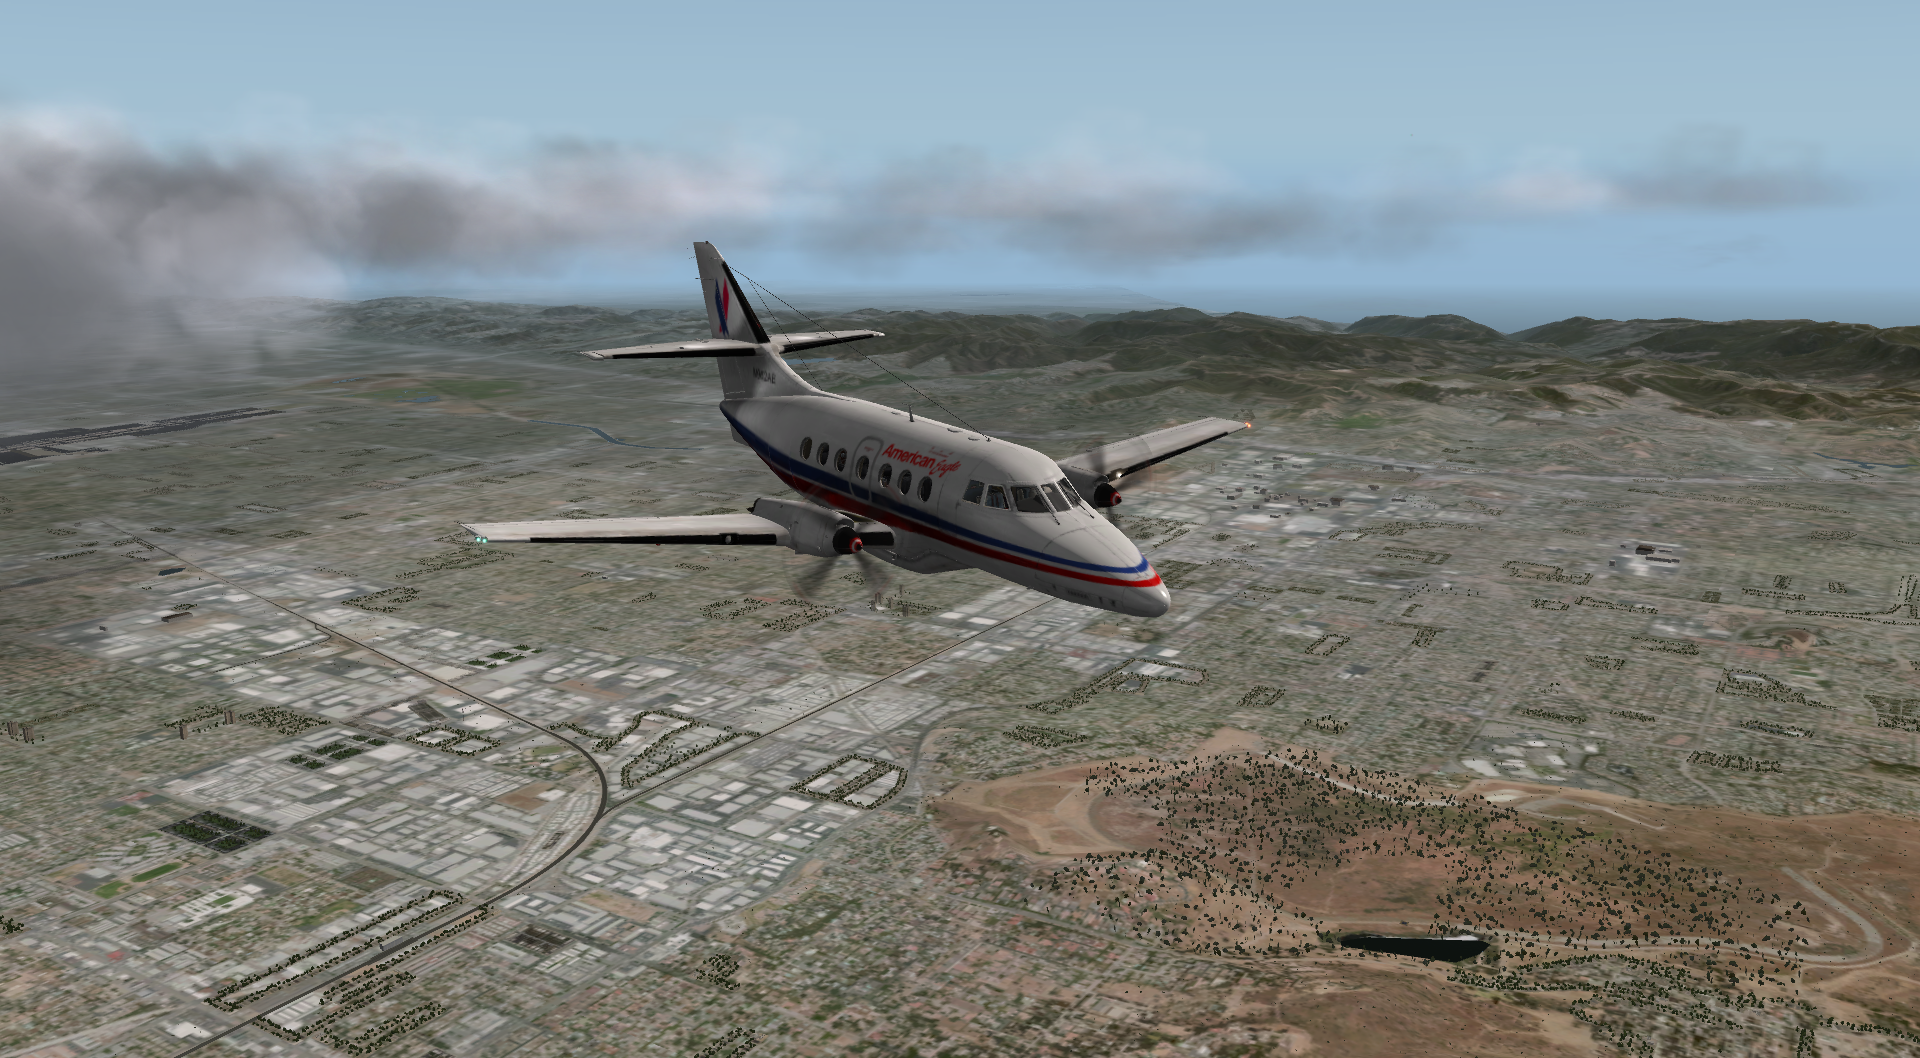 Just past a somewhat cloudy Van Nuys with LAX in the distance